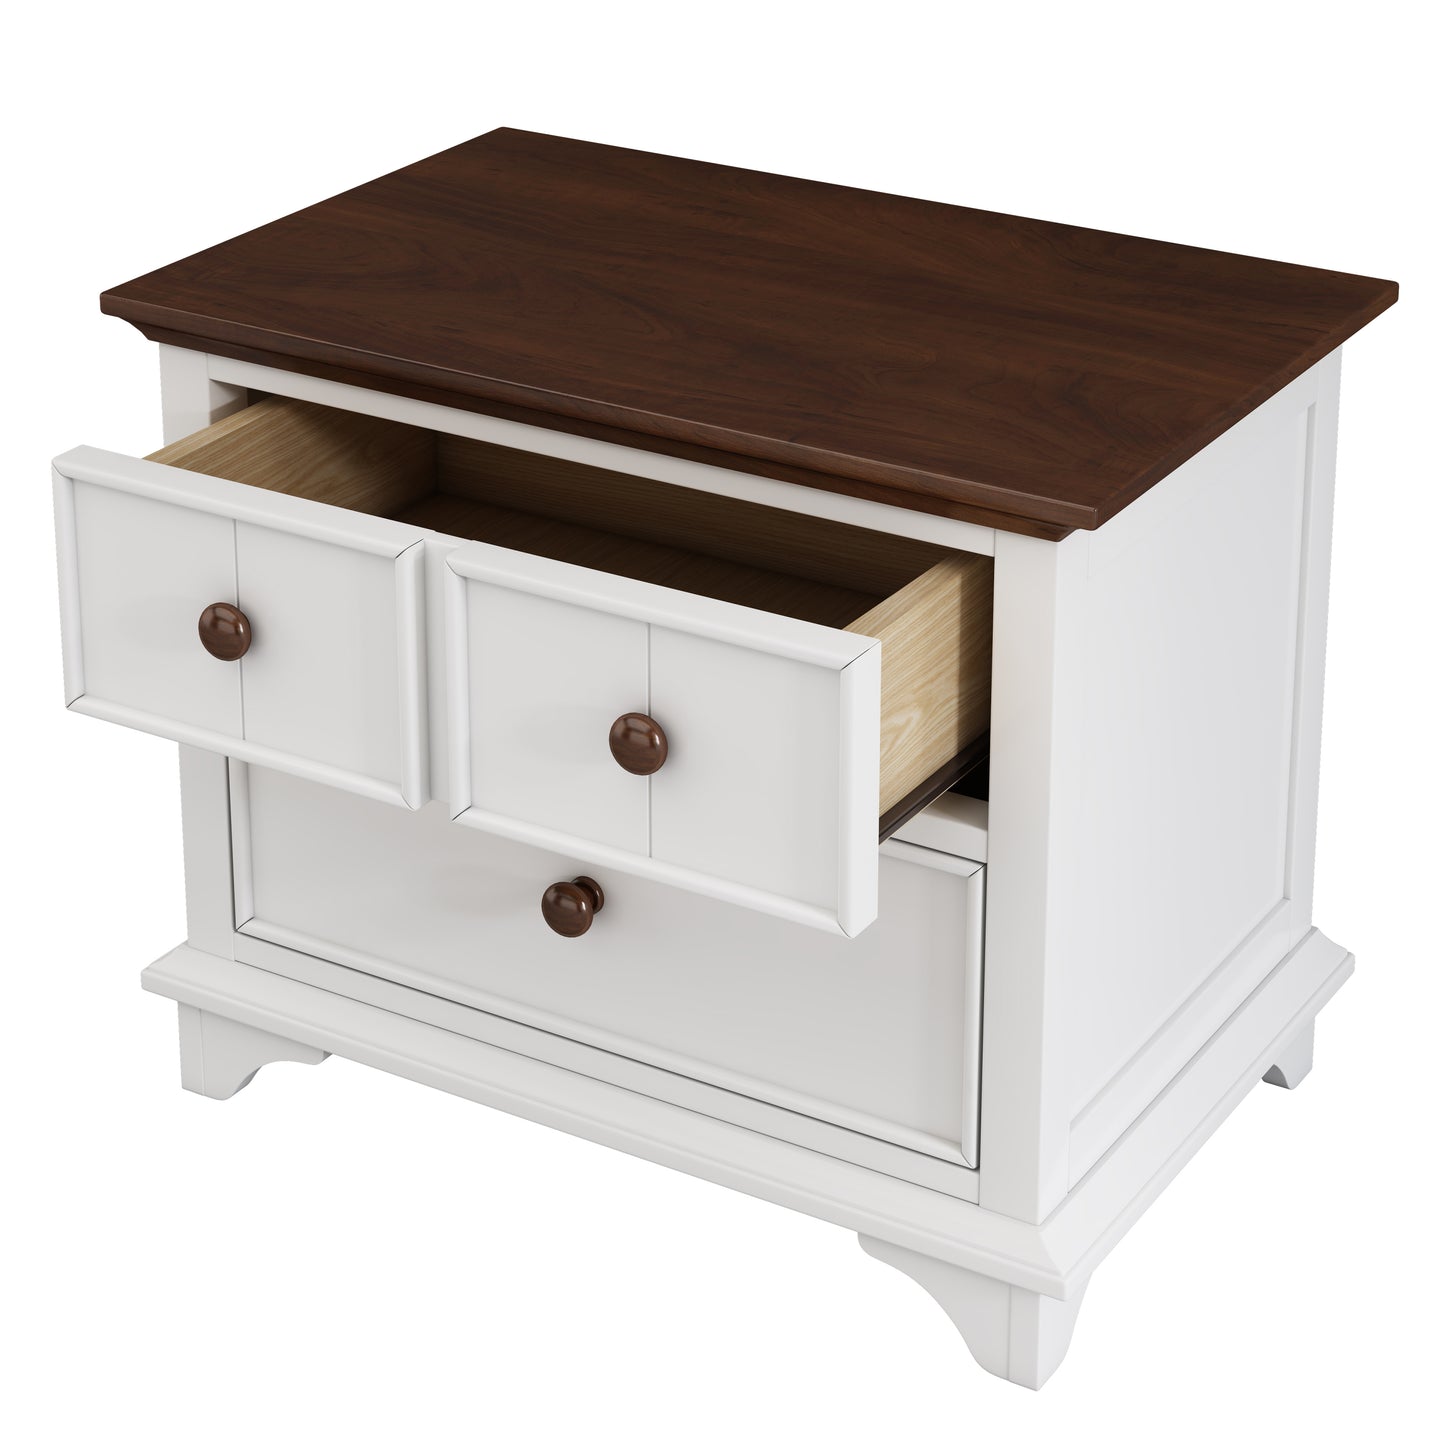 Wooden Captain Two-Drawer Nightstand Kids Night Stand  End Side Table for Bedroom, Living Room, Kids' Room, White+Walnut